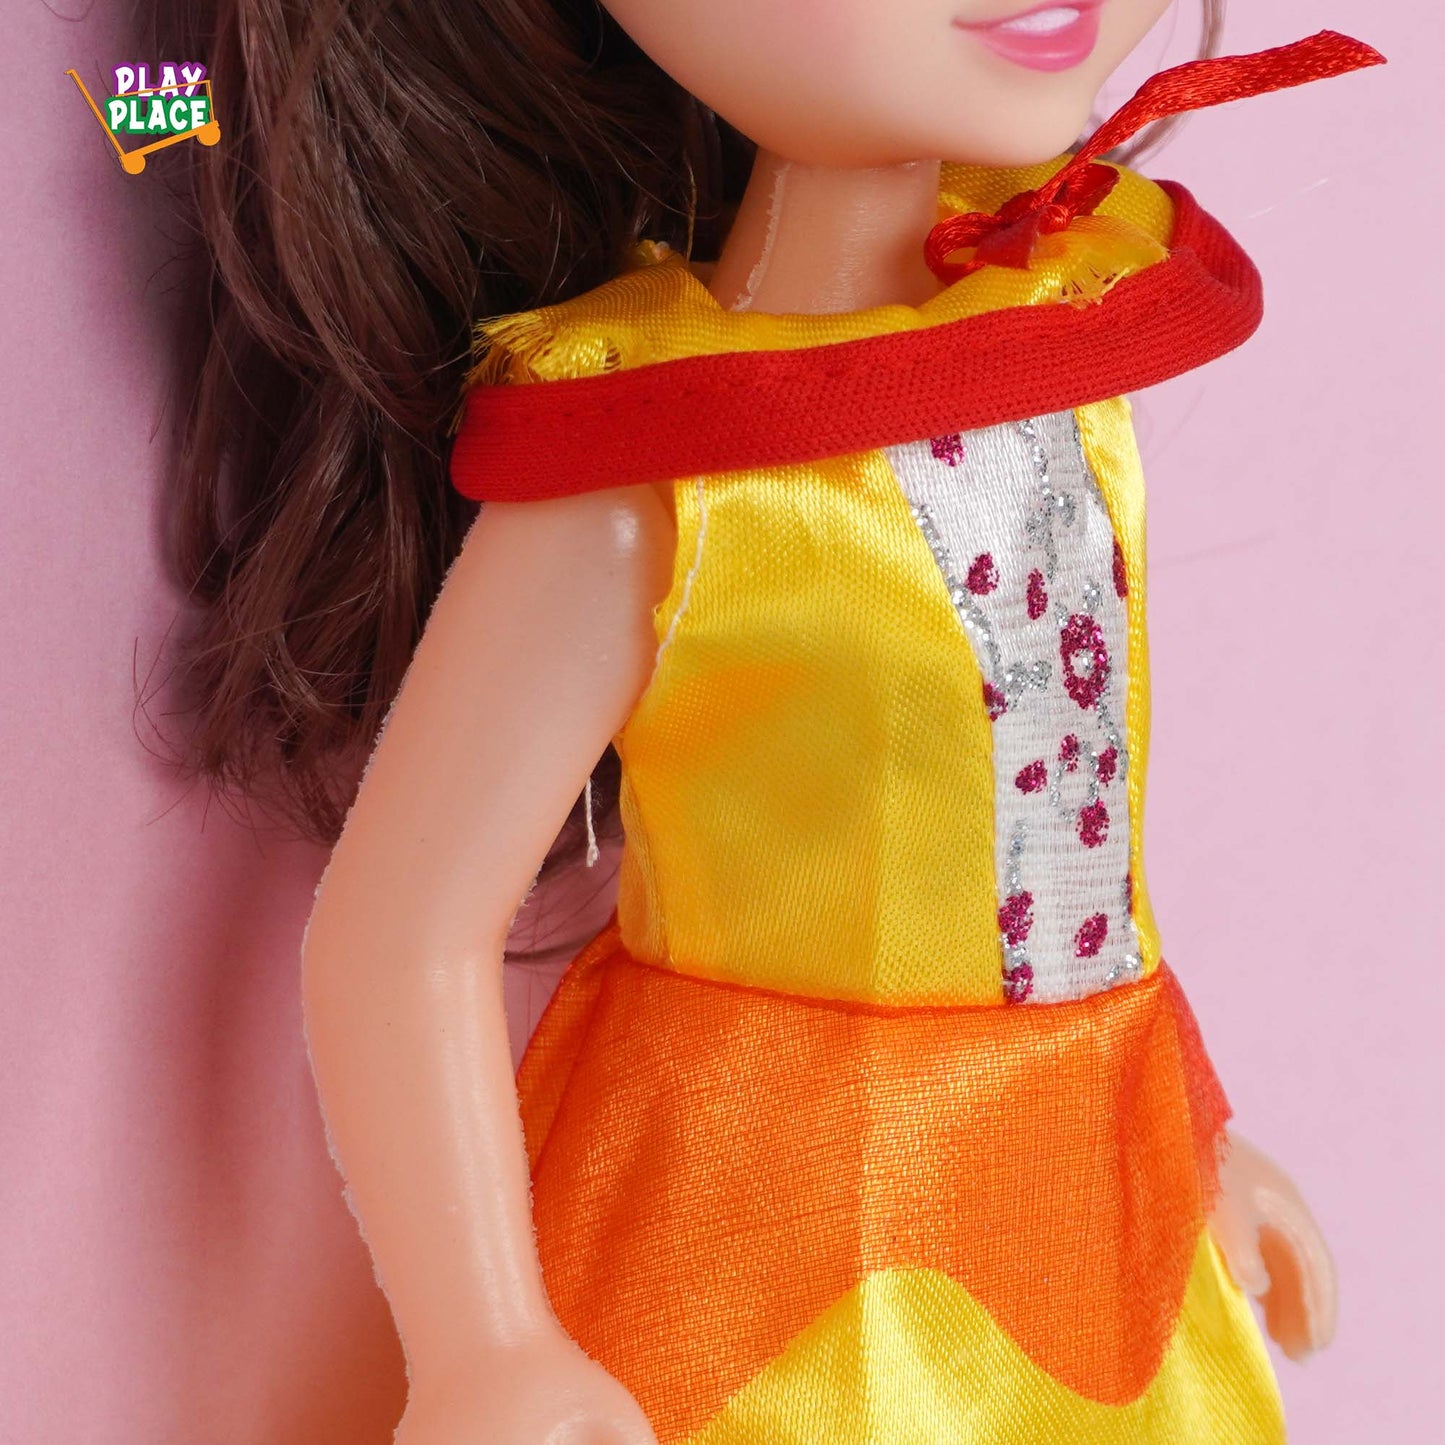 Beauty and the Beast Princess Bella Doll